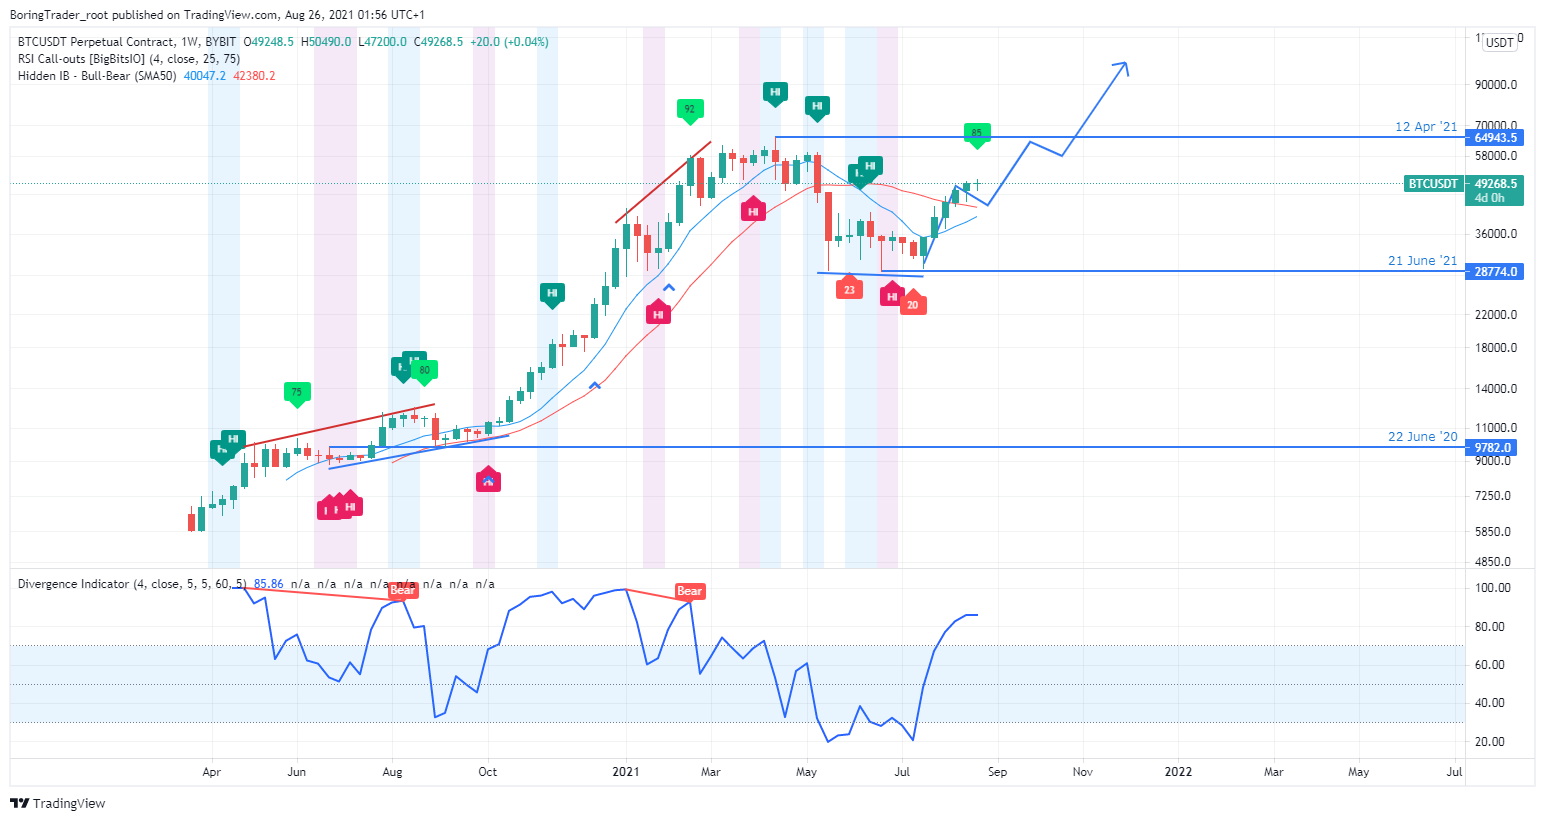 BTCUSD weekly chart - 26th August 2021